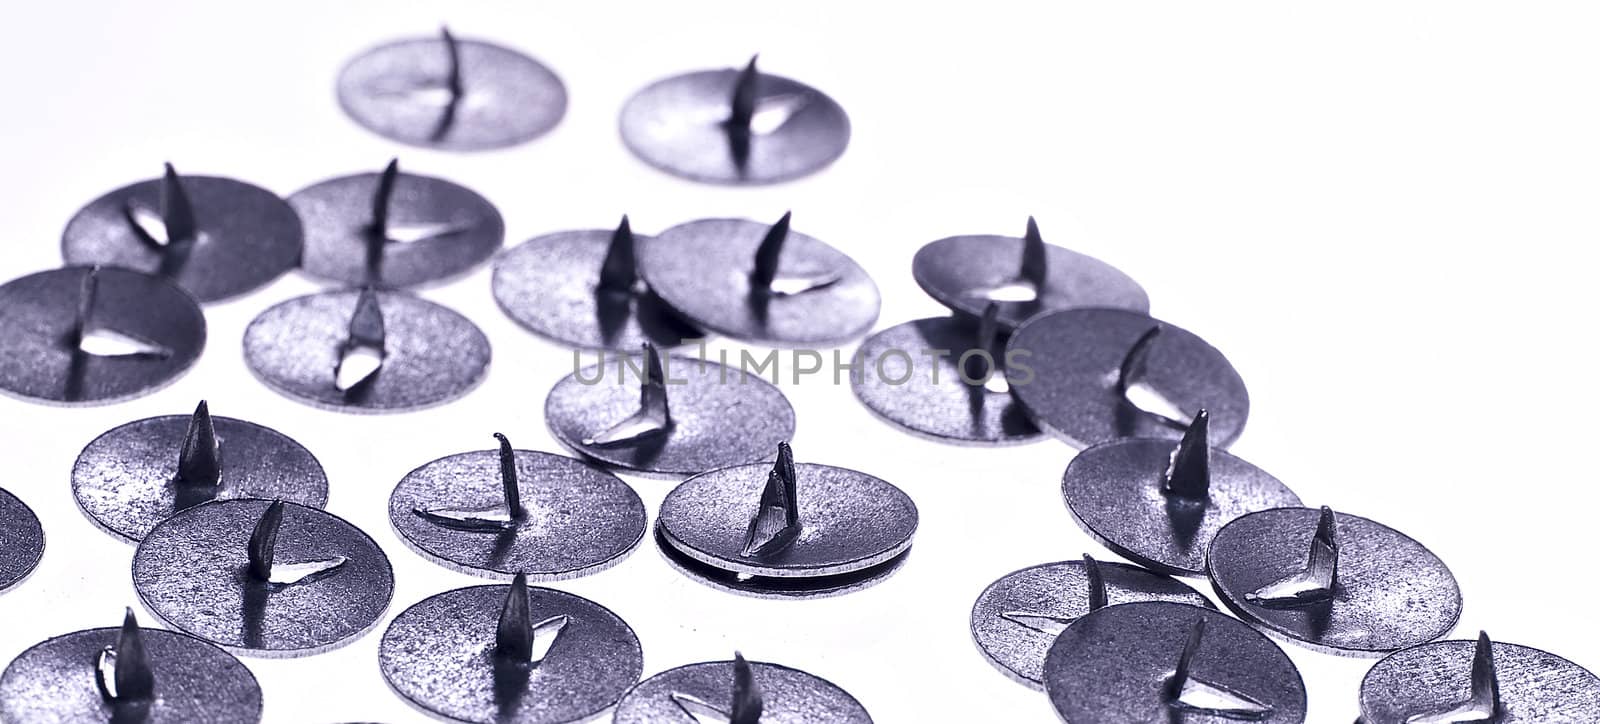 metall push pins isolated on white background